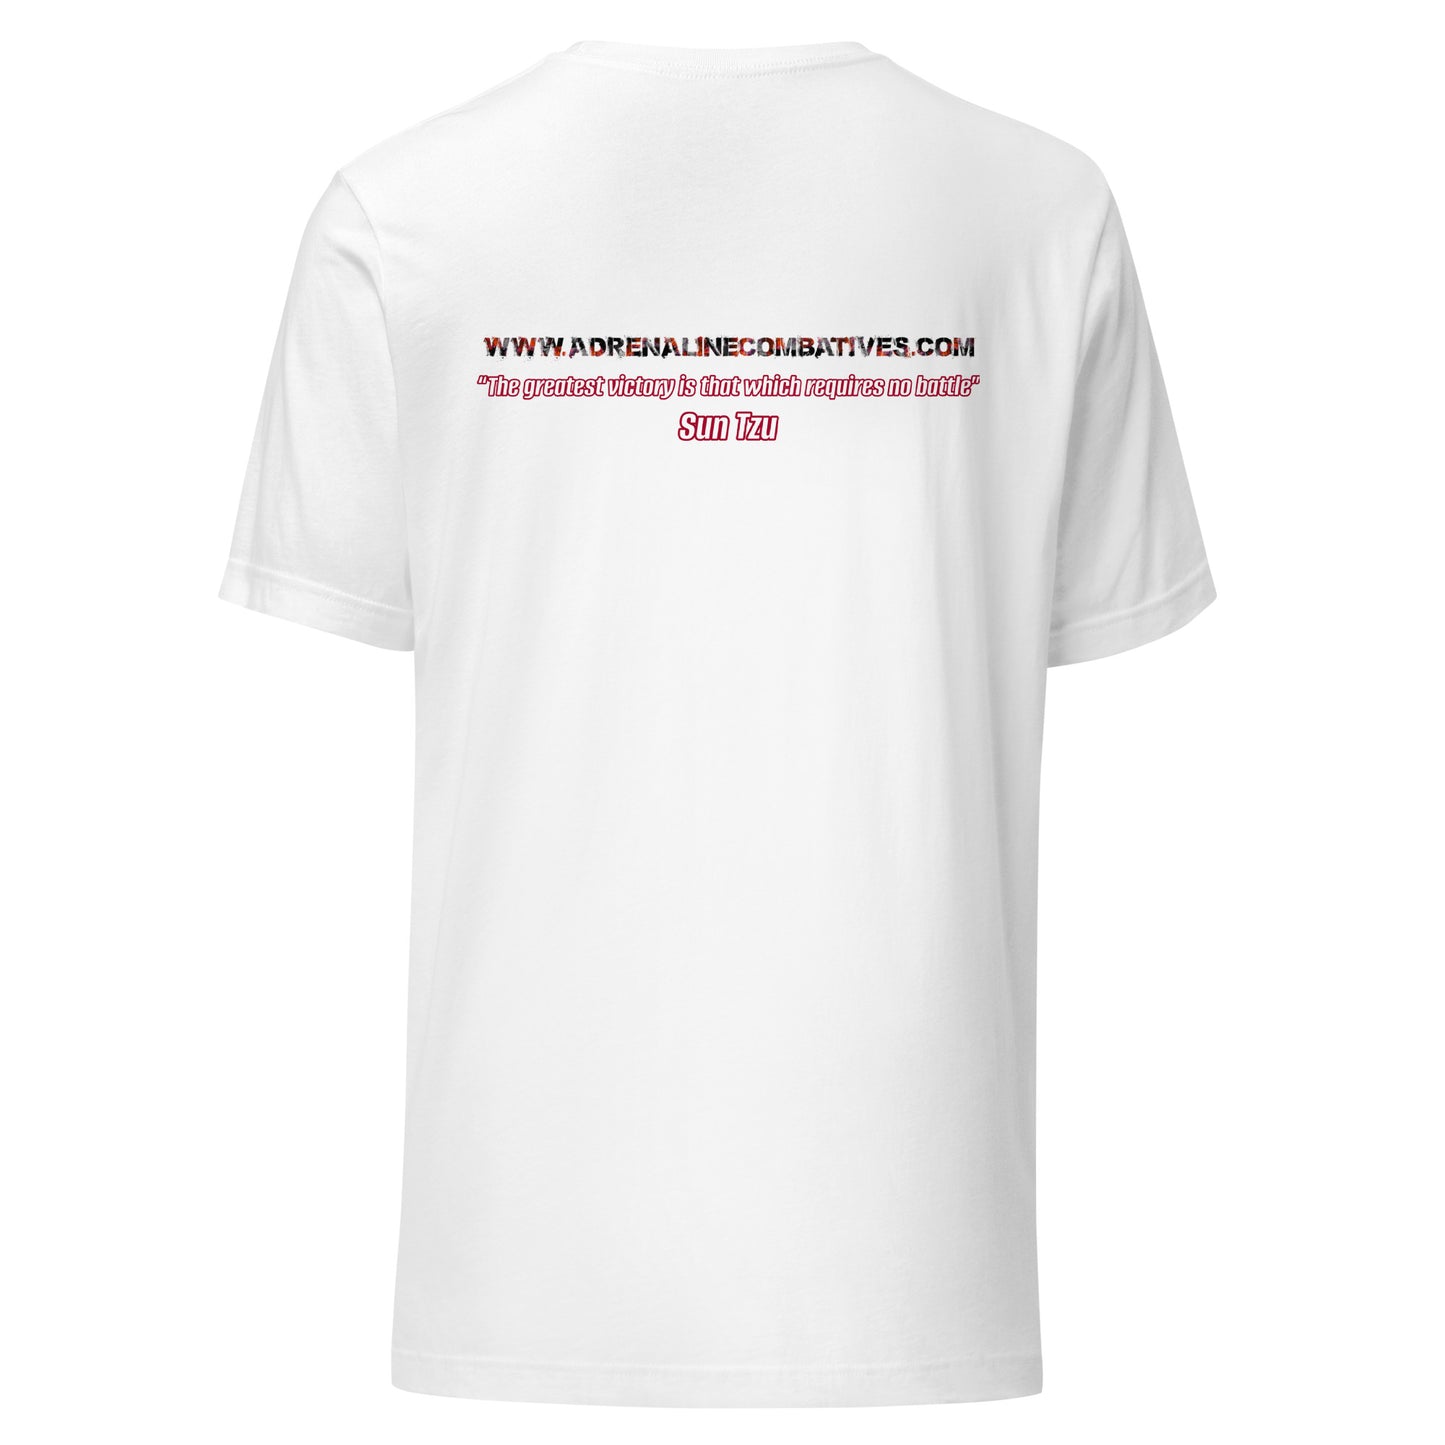 Unisex t-shirt - Adrenaline Combatives - Sun Tzu Quote: “The greatest victory is that which requires no battle”